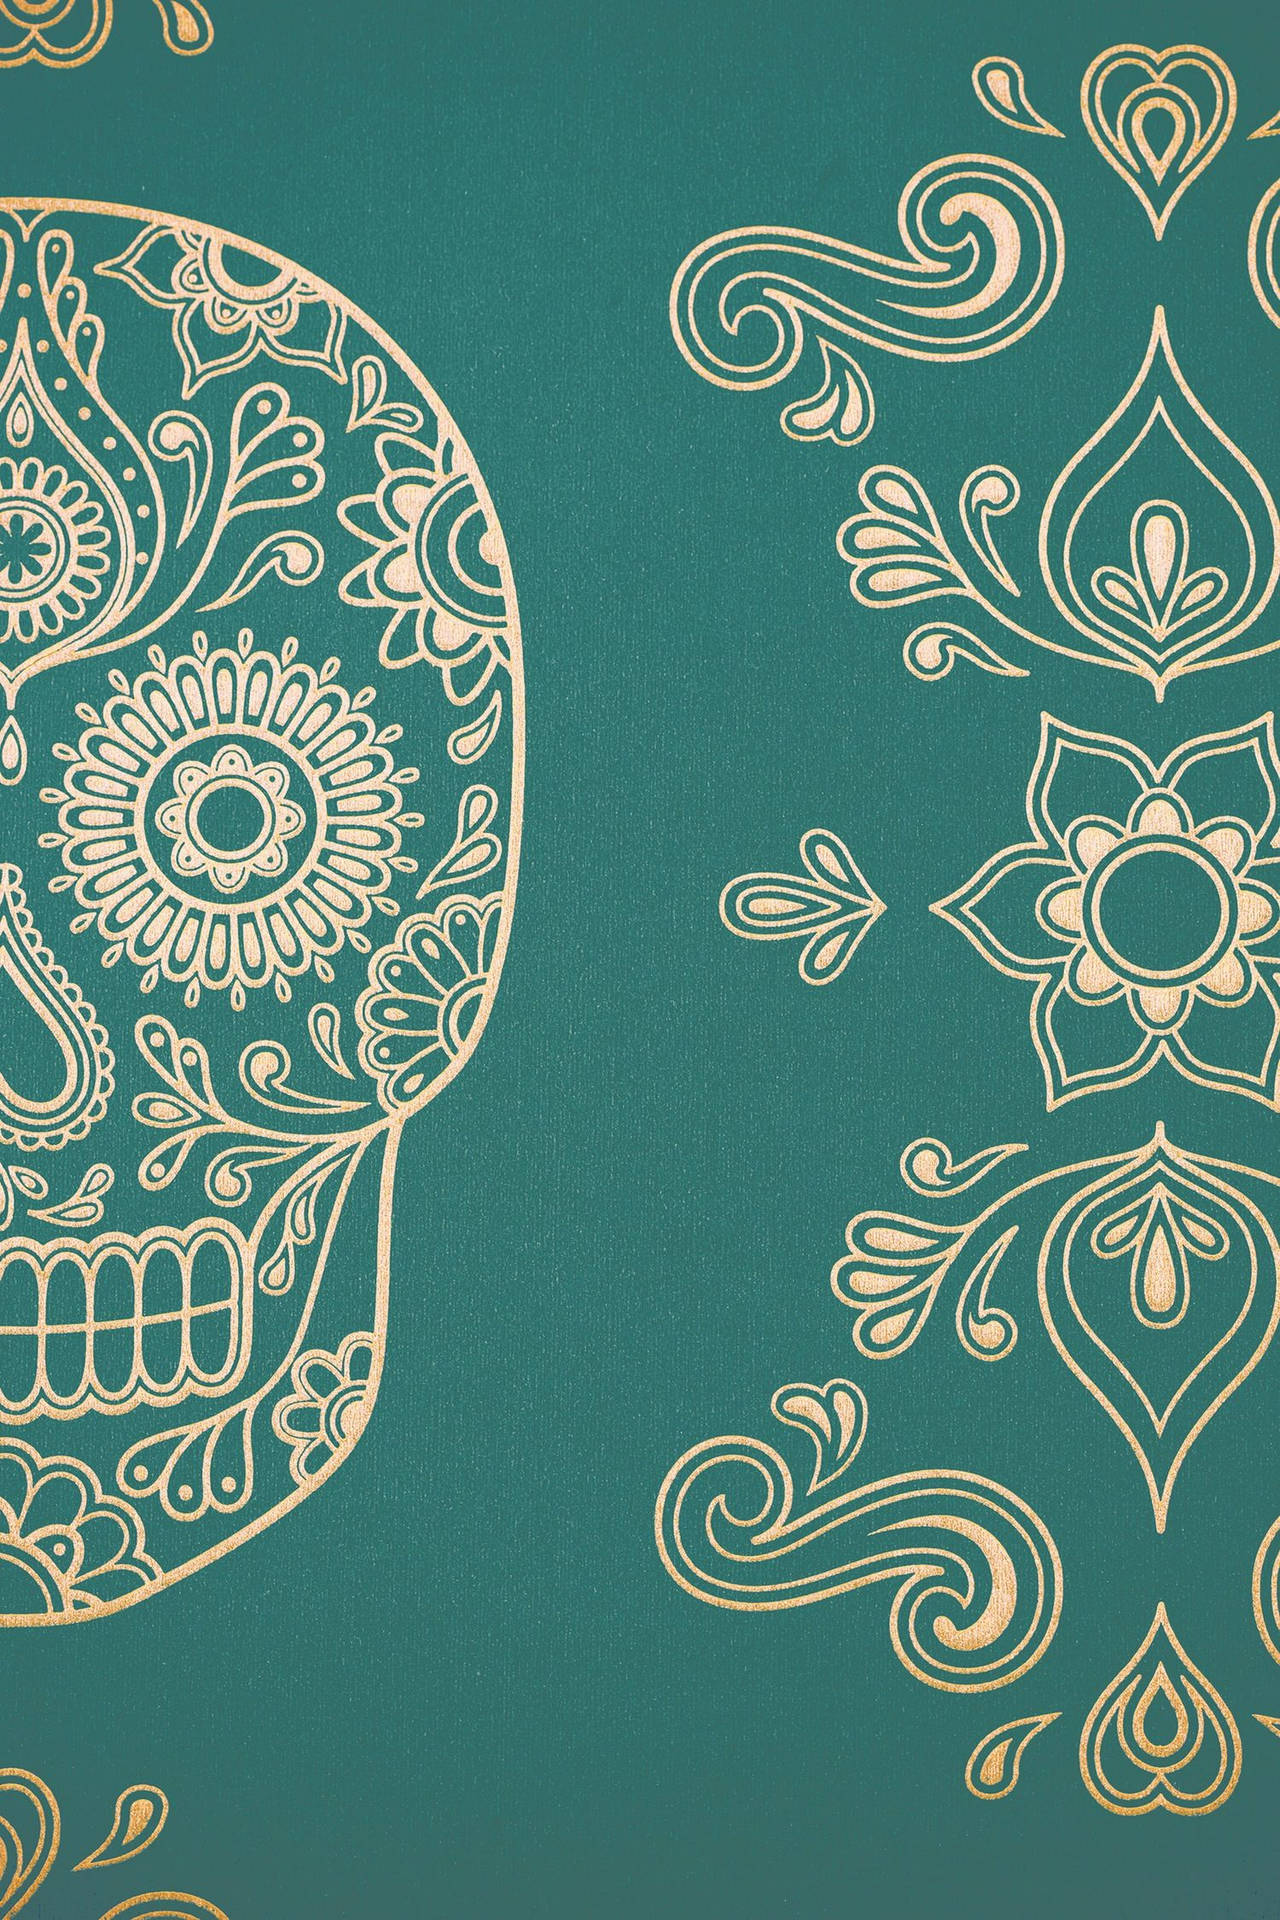 Mexican Stylized Floral Skull